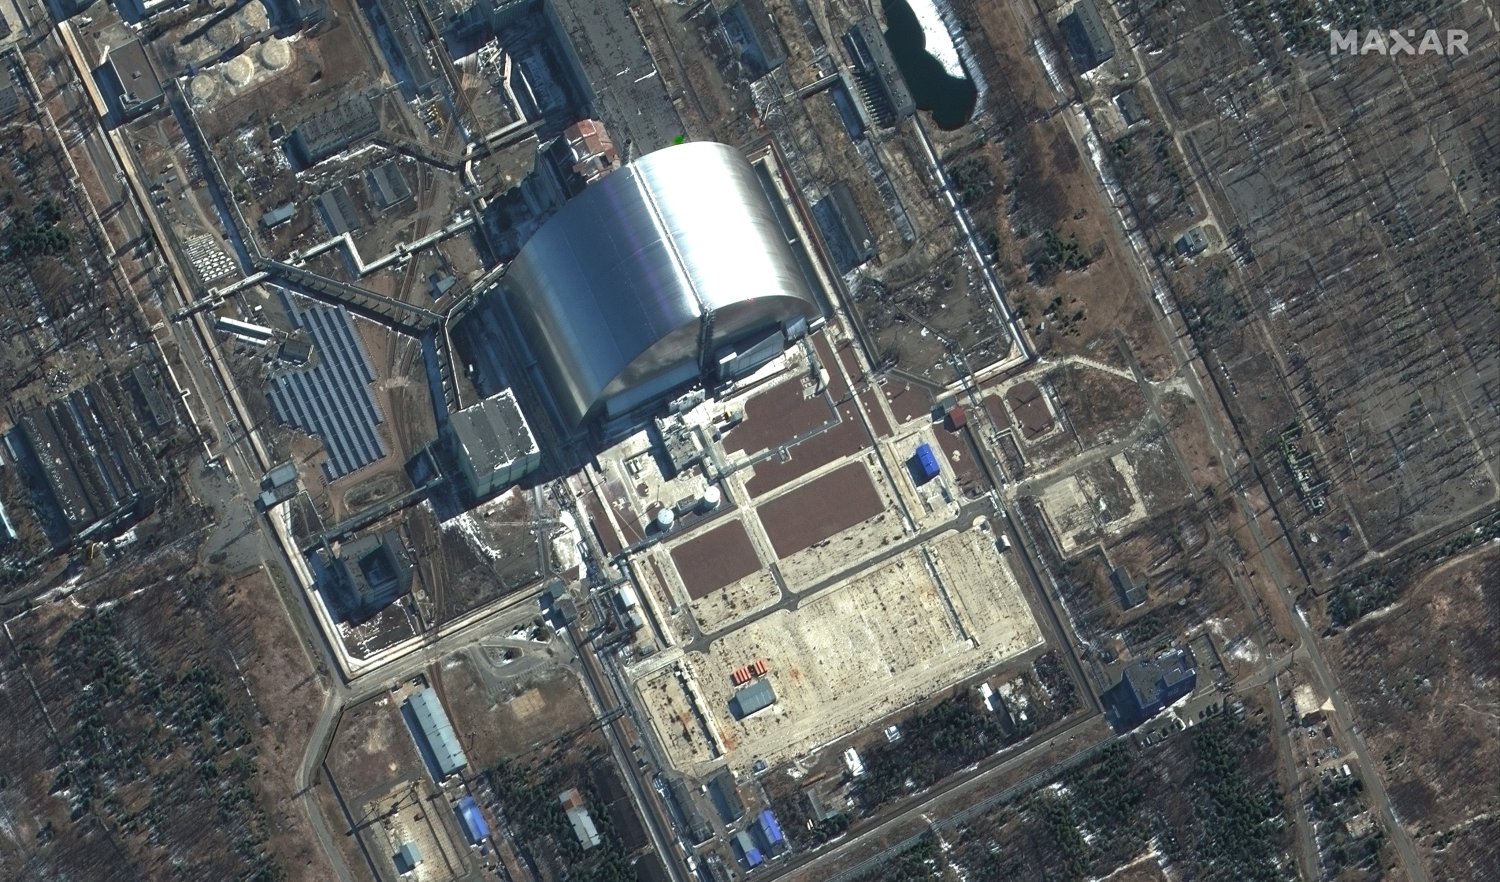 Latest satellite imagery released by private satellite company Maxar on Friday March 11, 2022 showing Russia-occupied Chernobyl nuclear plant in Pripyat, northern Ukraine.